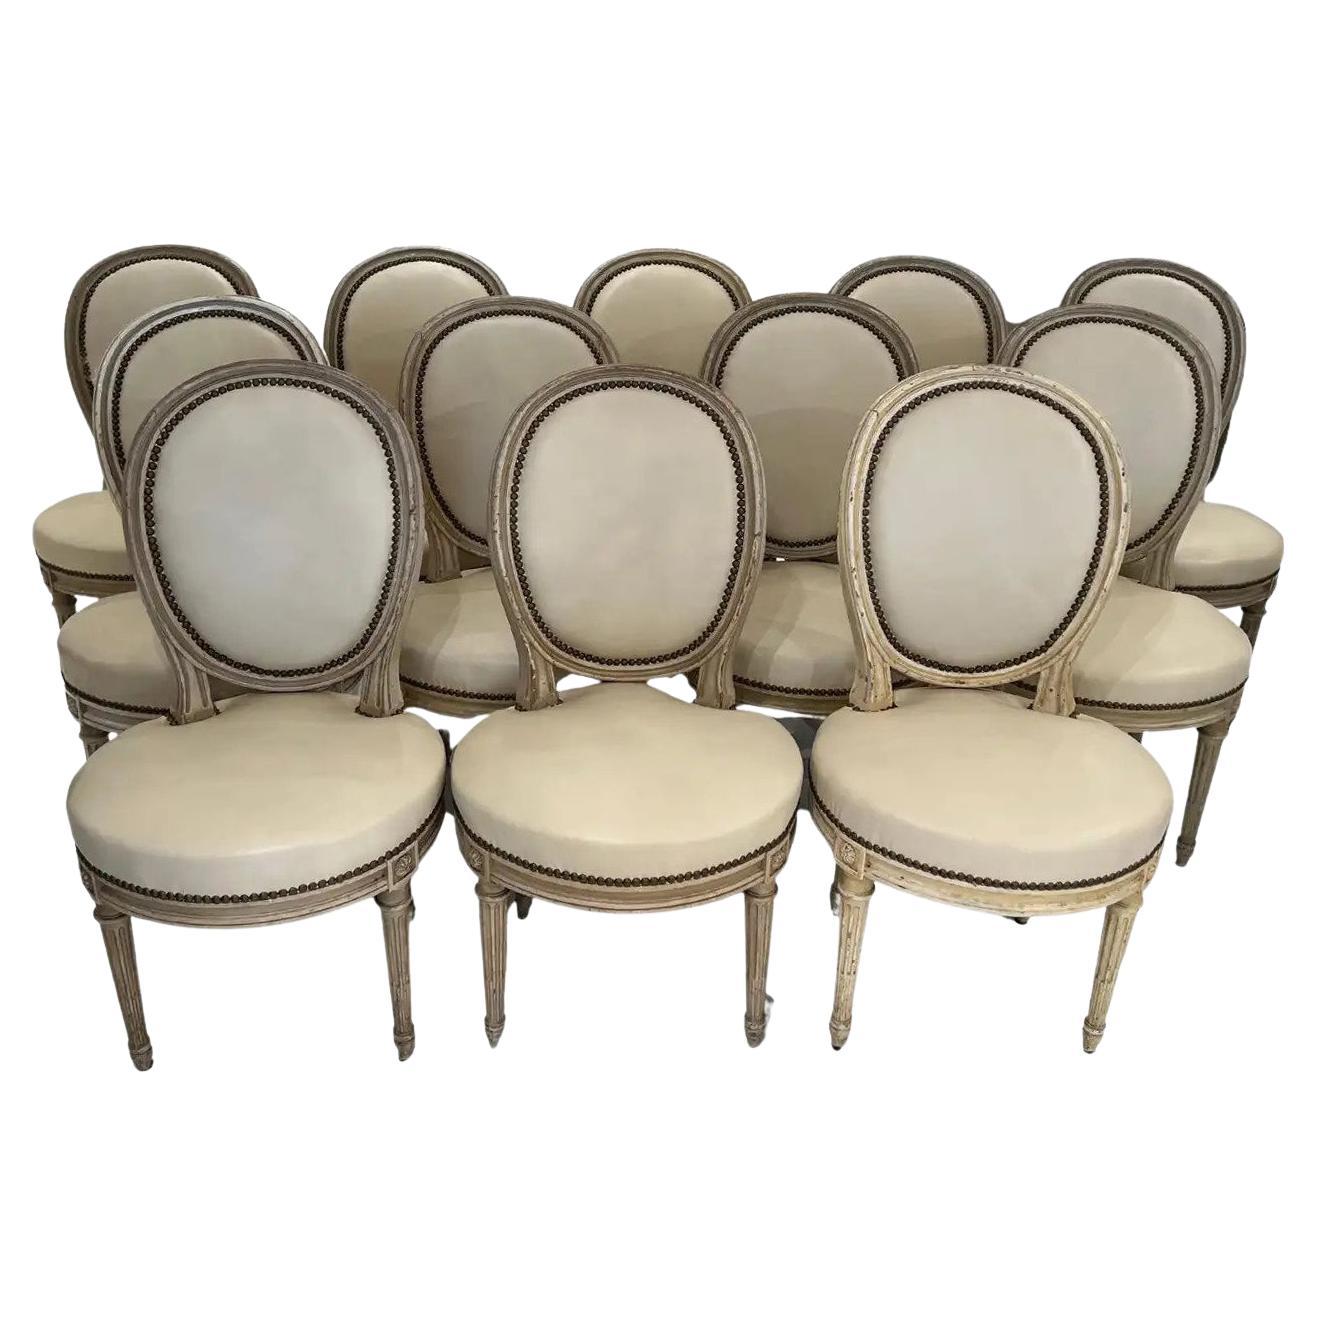 Set of 12 Oval Back Chairs with Leather